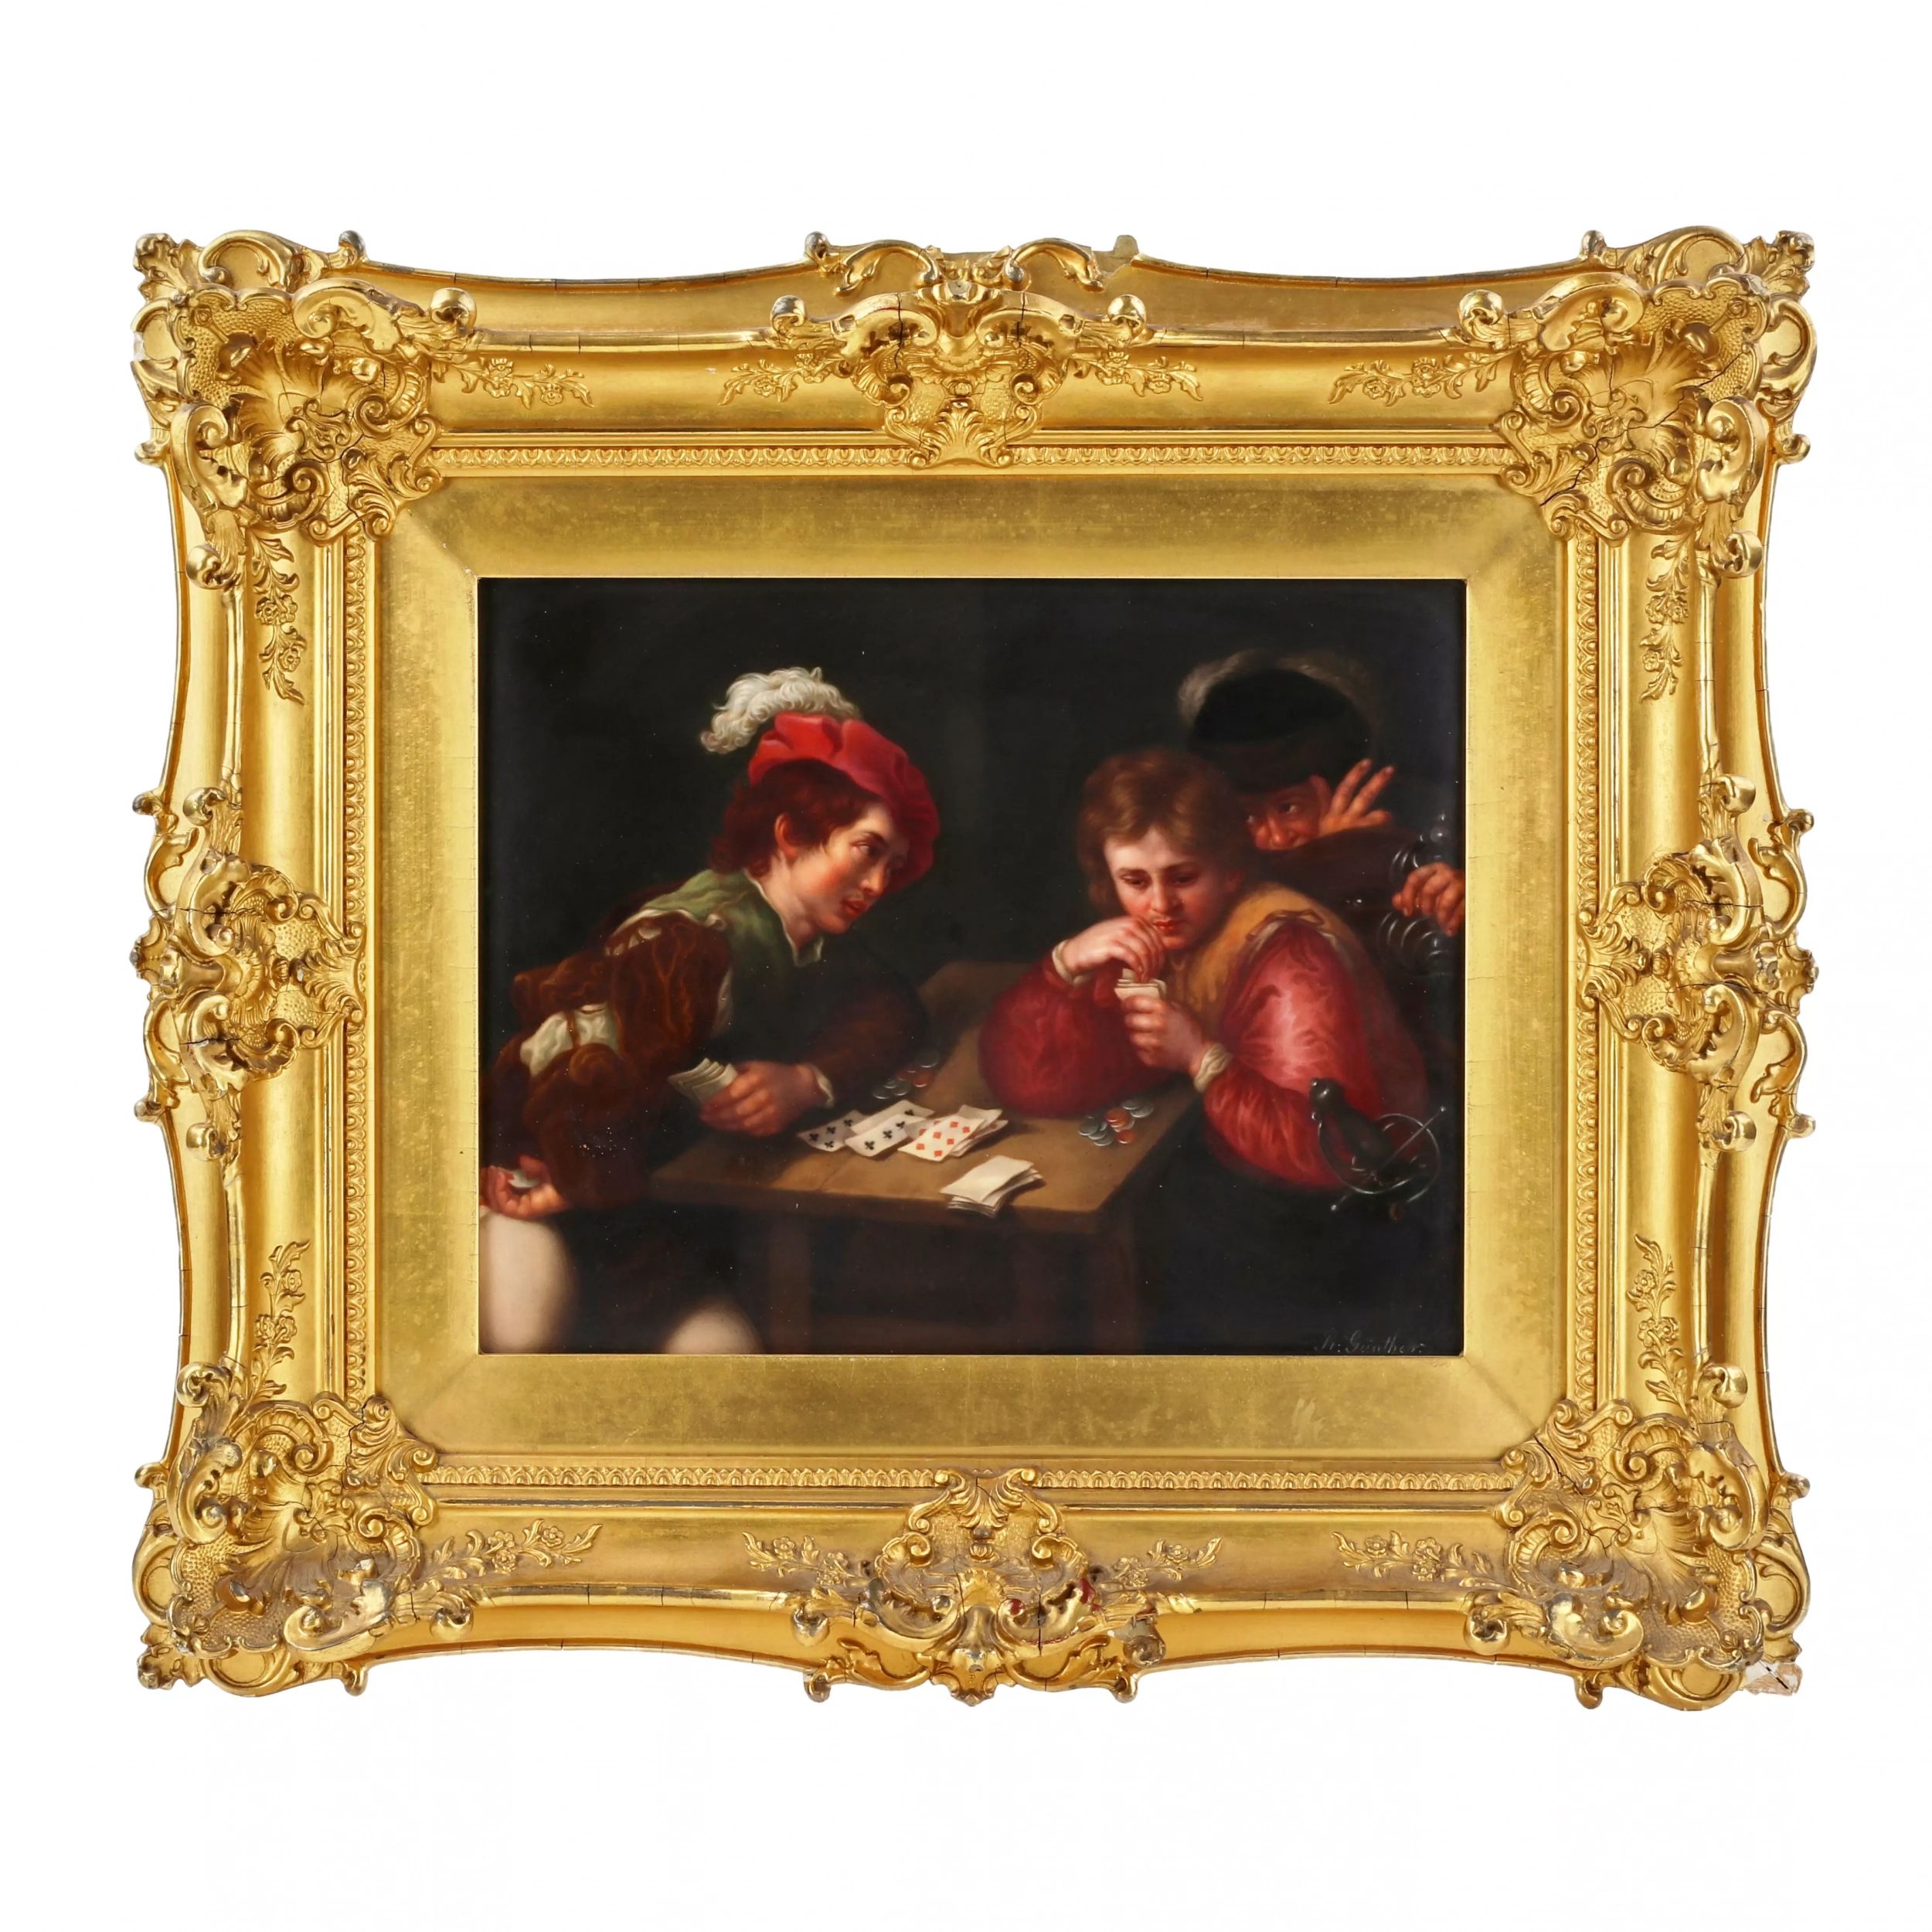 R-Gunther-German-porcelain-layer-after-Valentin-de-Boulogne-Gamblers-The-turn-of-the-19th-20th-century-